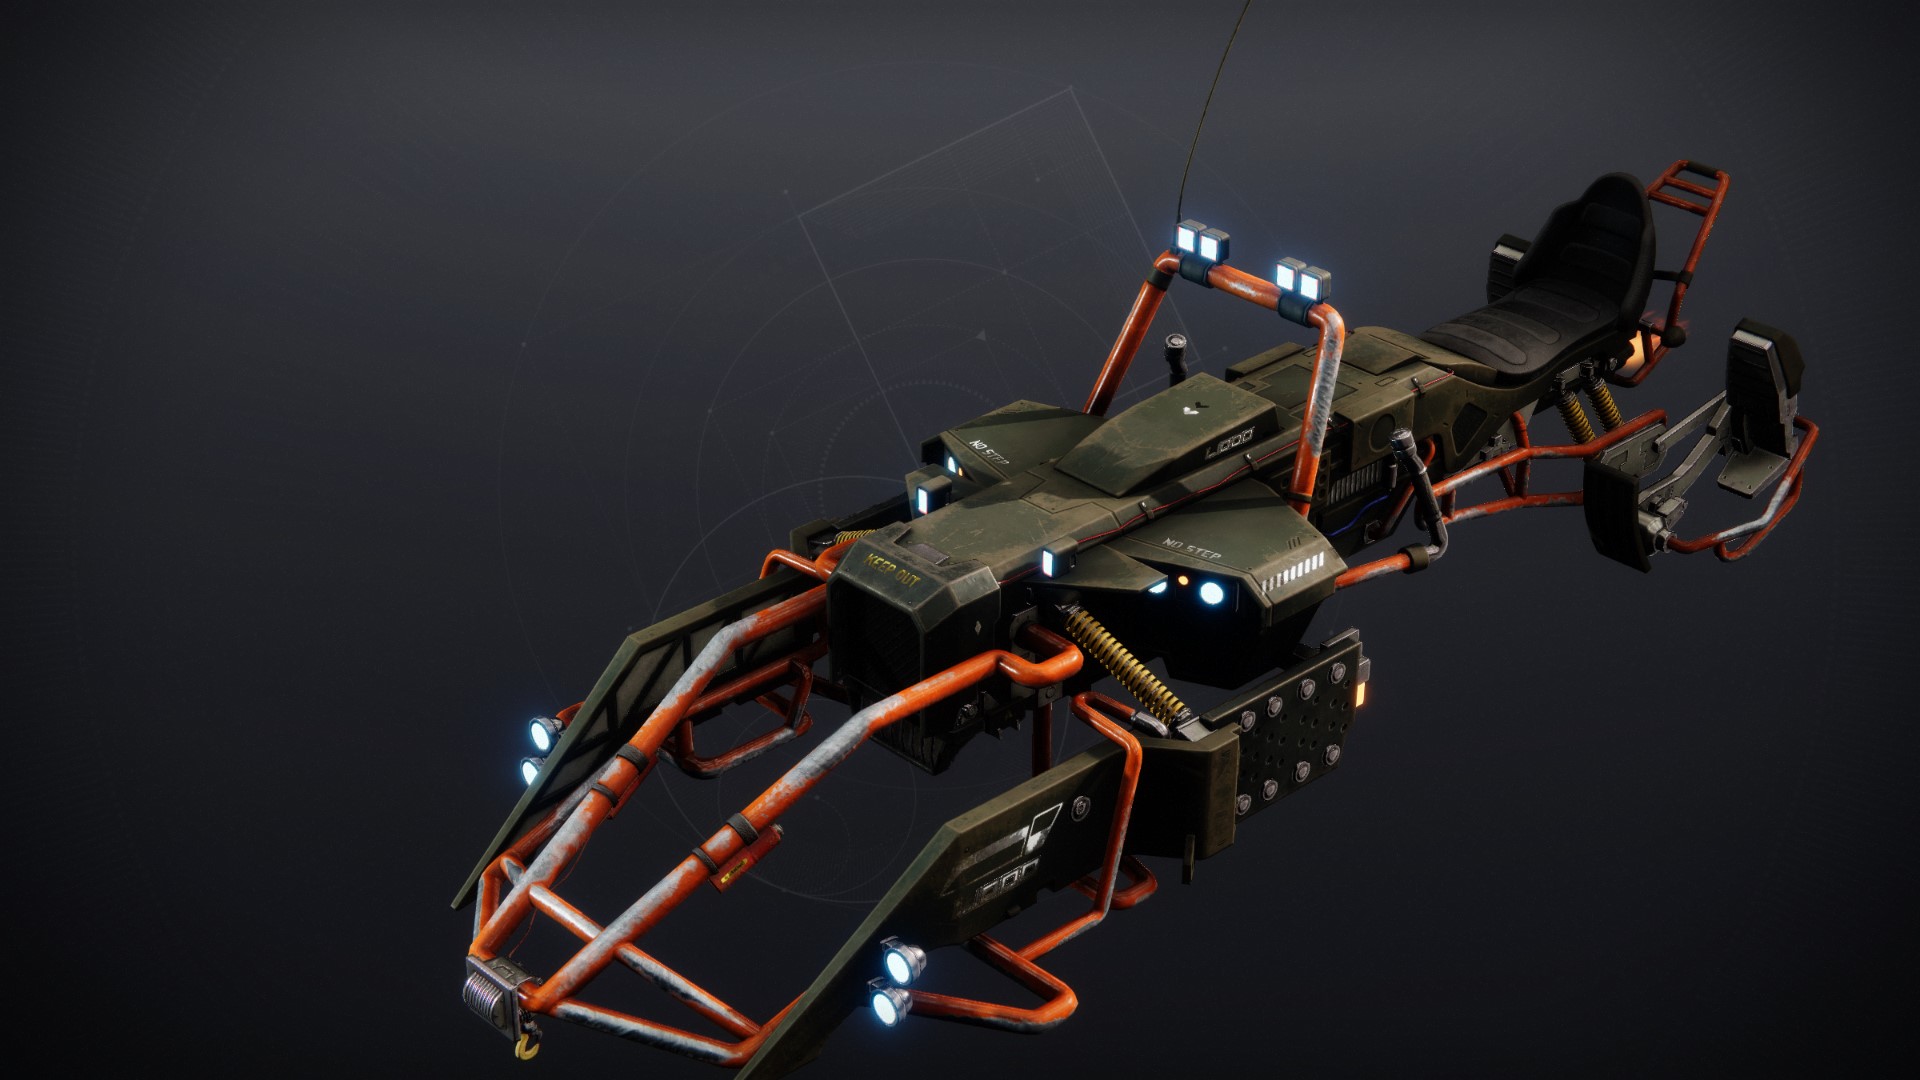 An in-game render of the Sandrail.